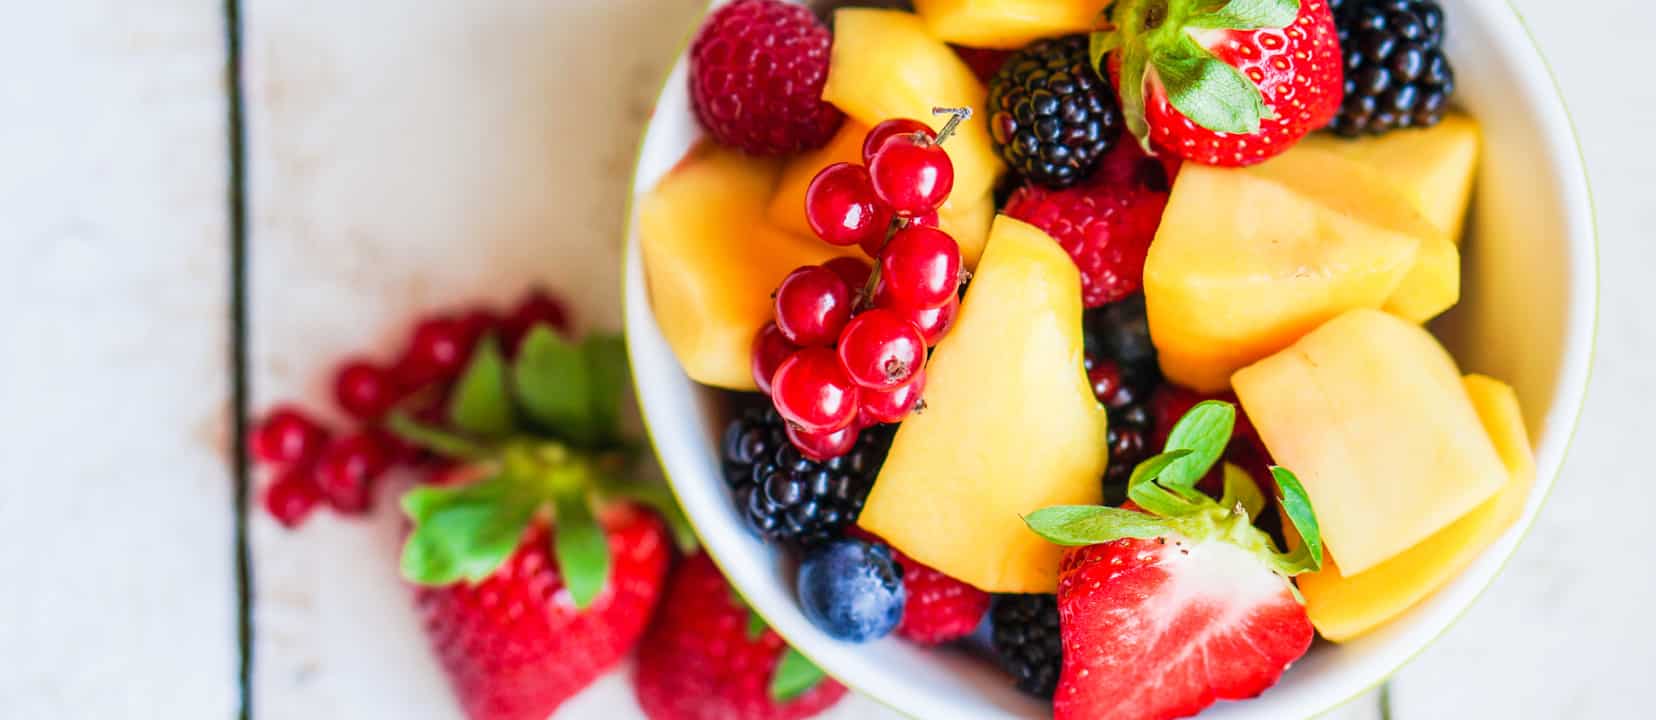 If Fructose is Bad, What about Fruit?